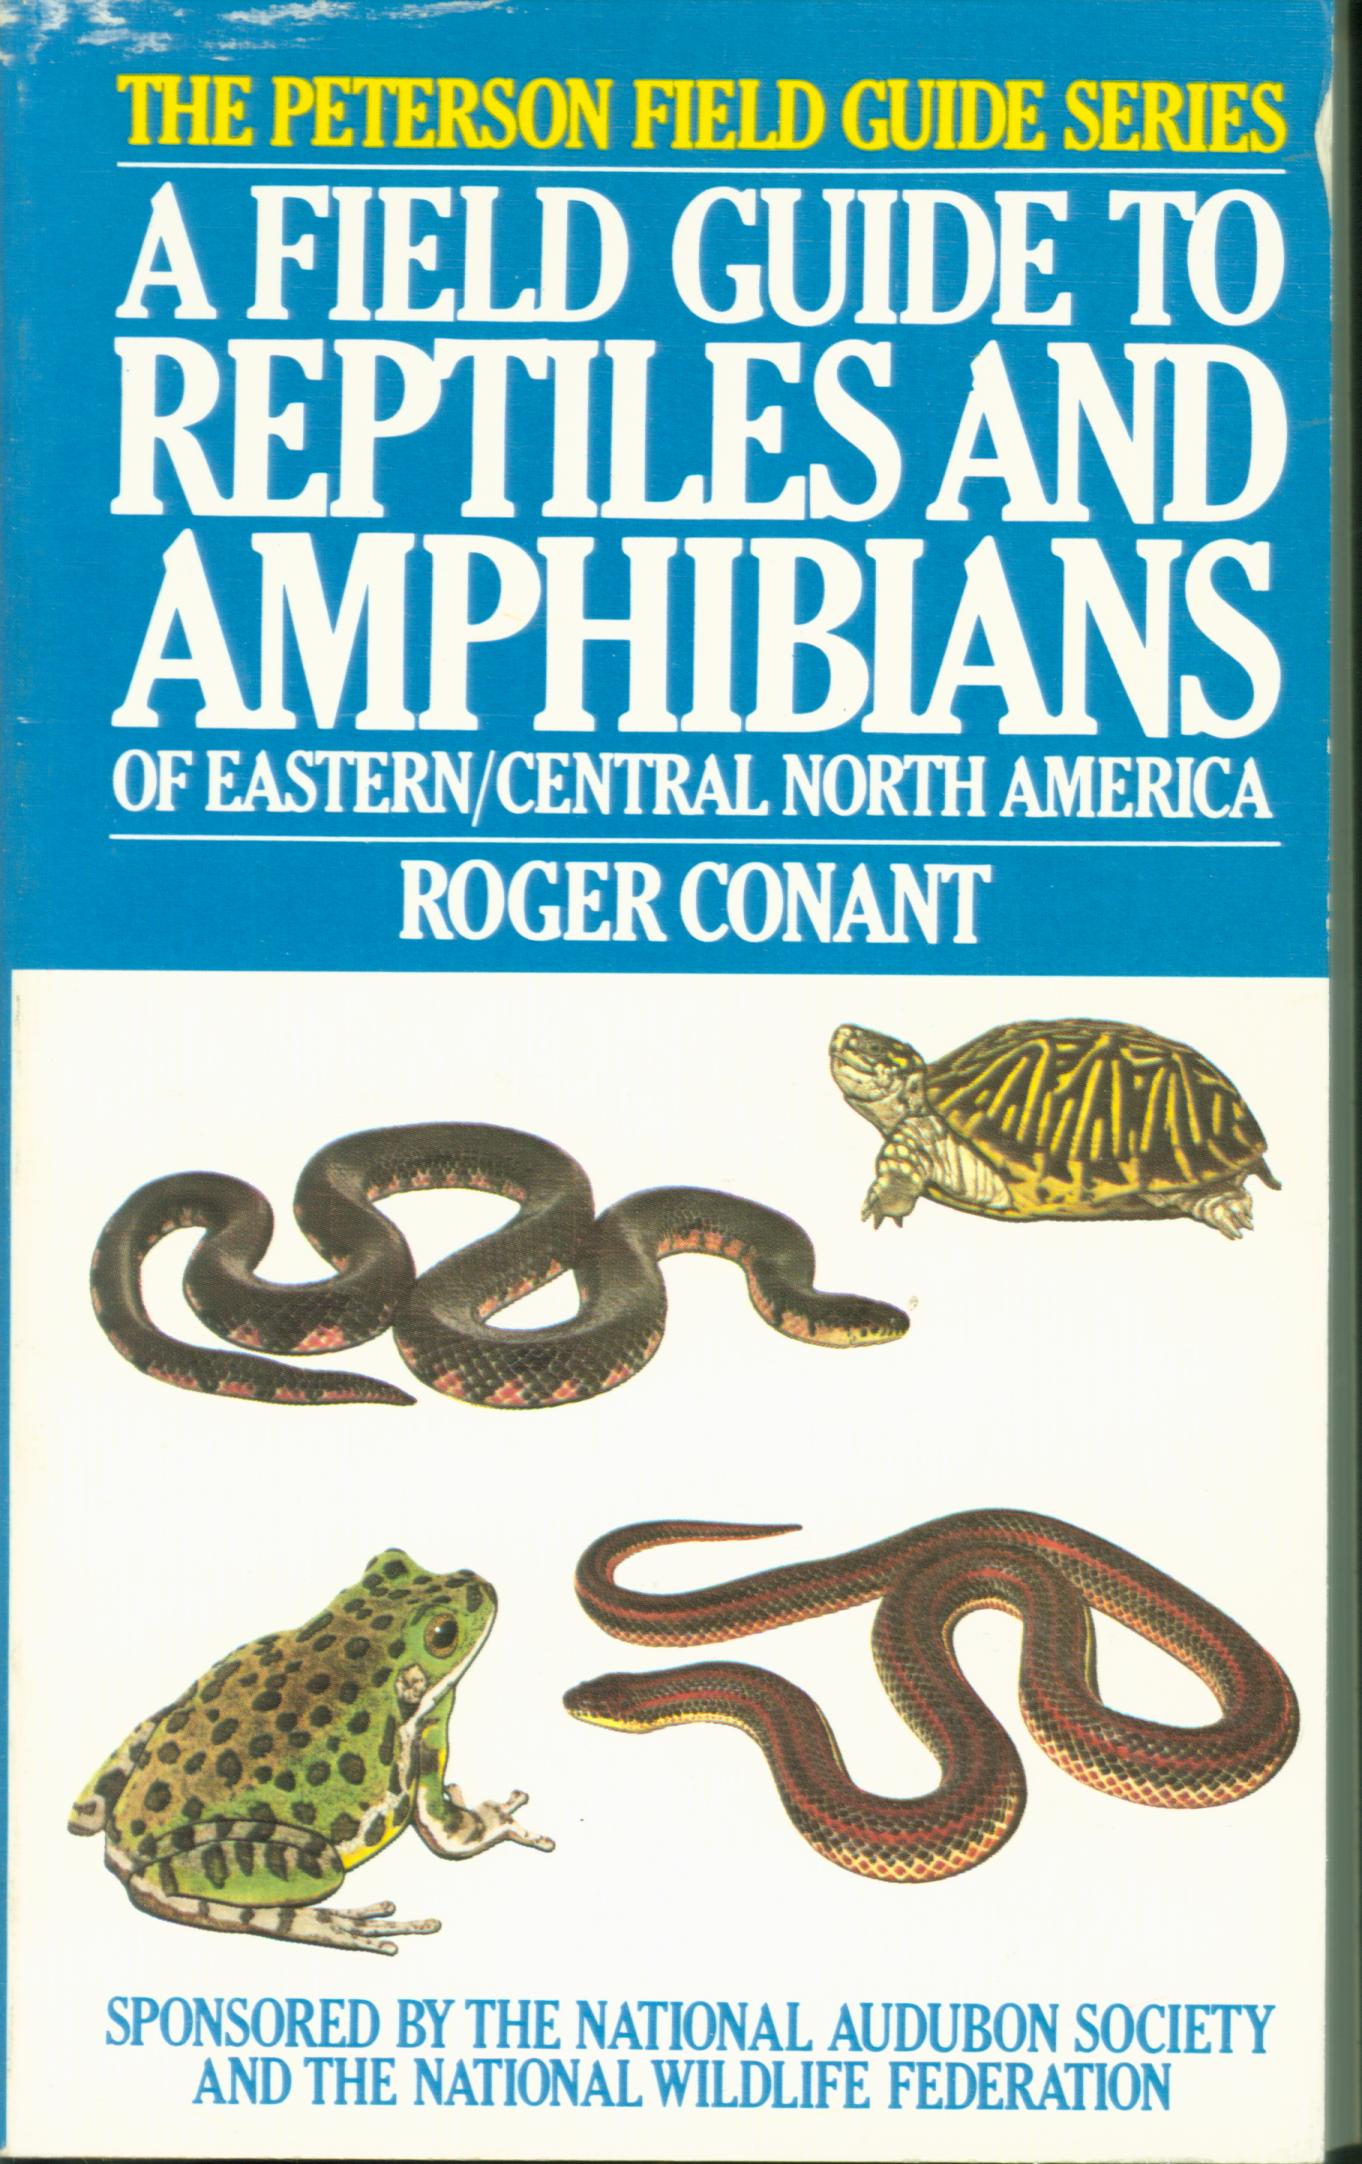 A FIELD GUIDE TO REPTILES AND AMPHIBIANS OF EASTERN/CENTRAL NORTH AMERICA. 